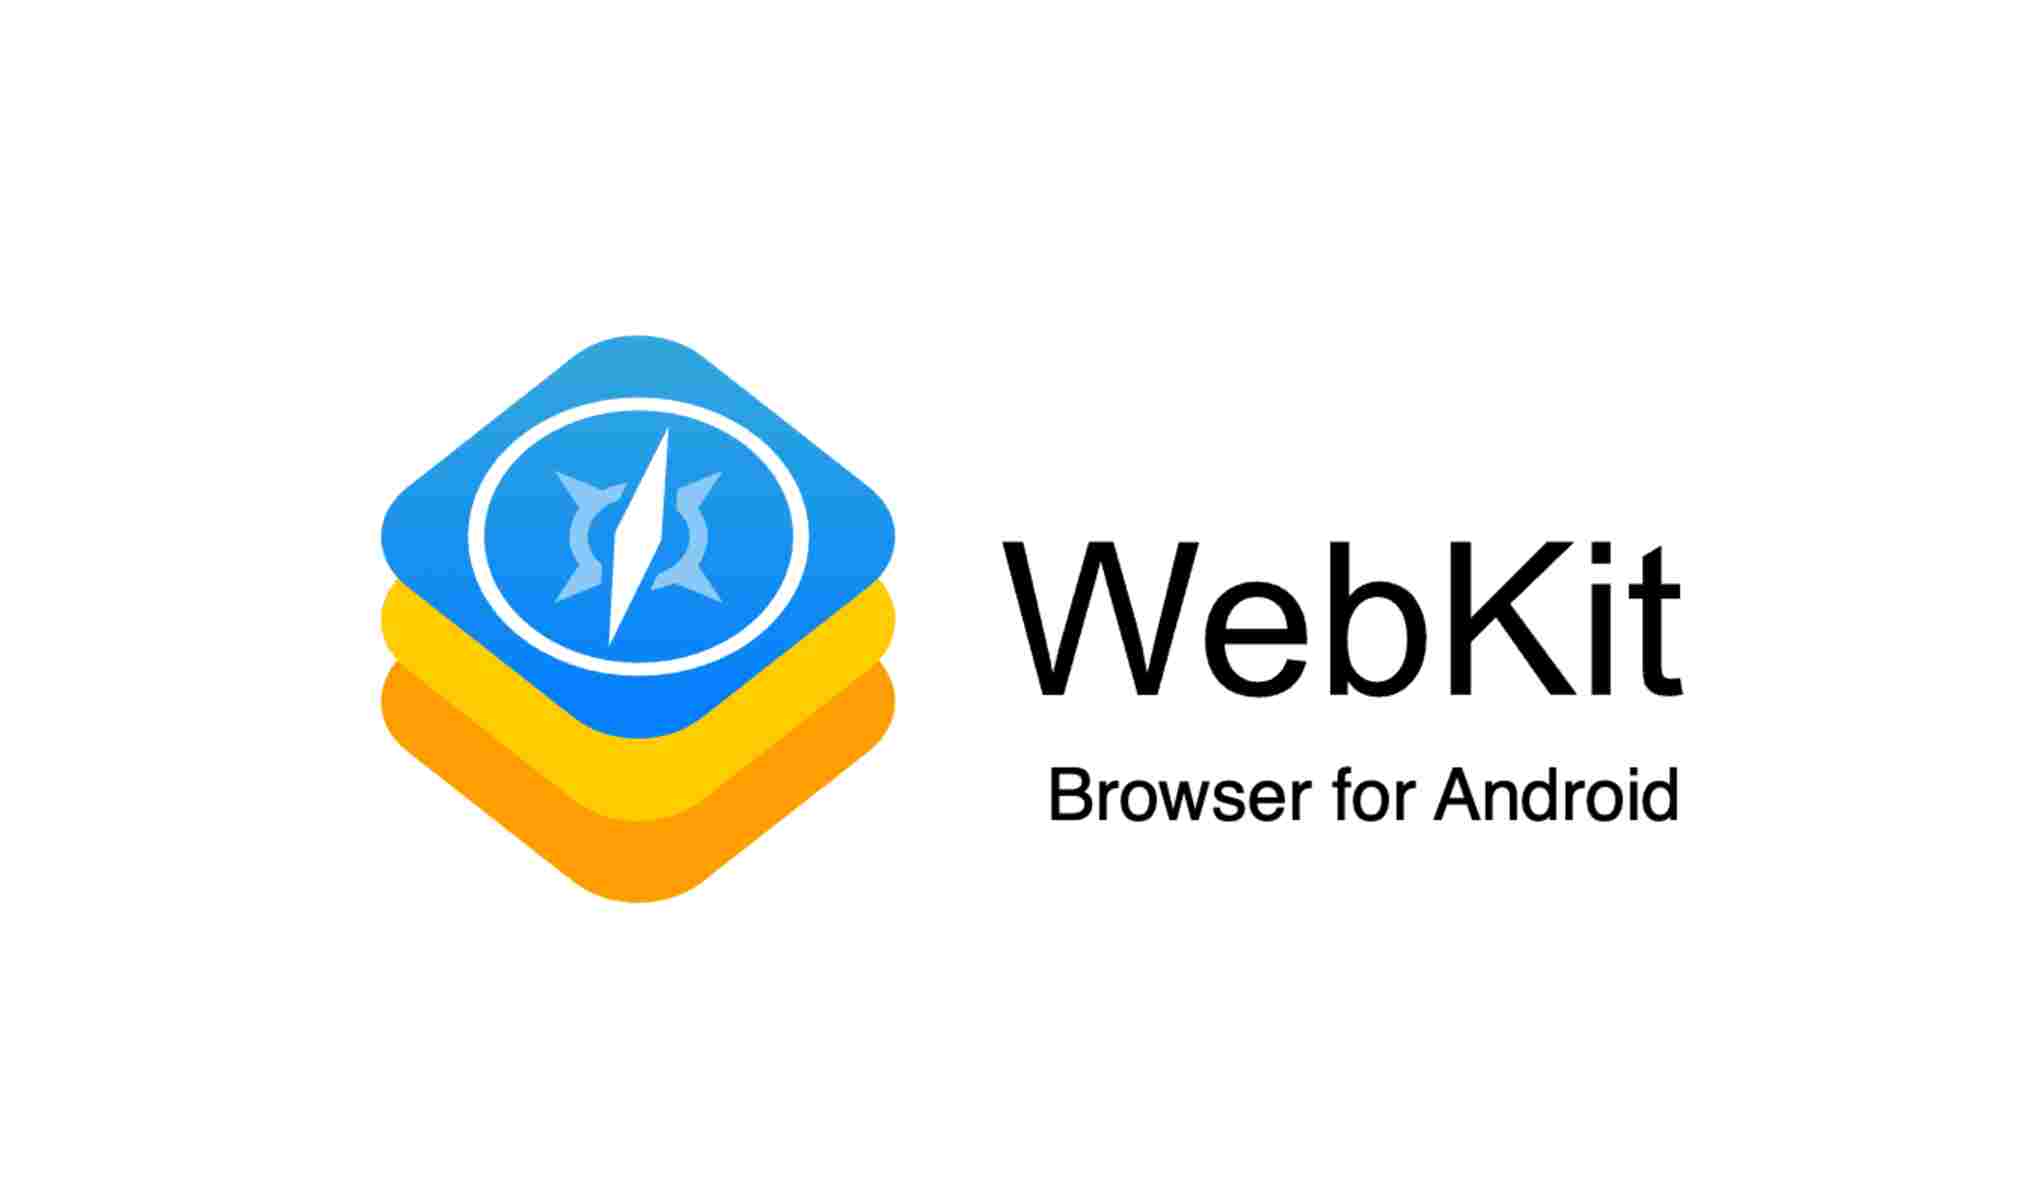 What Is A Webkit Browser